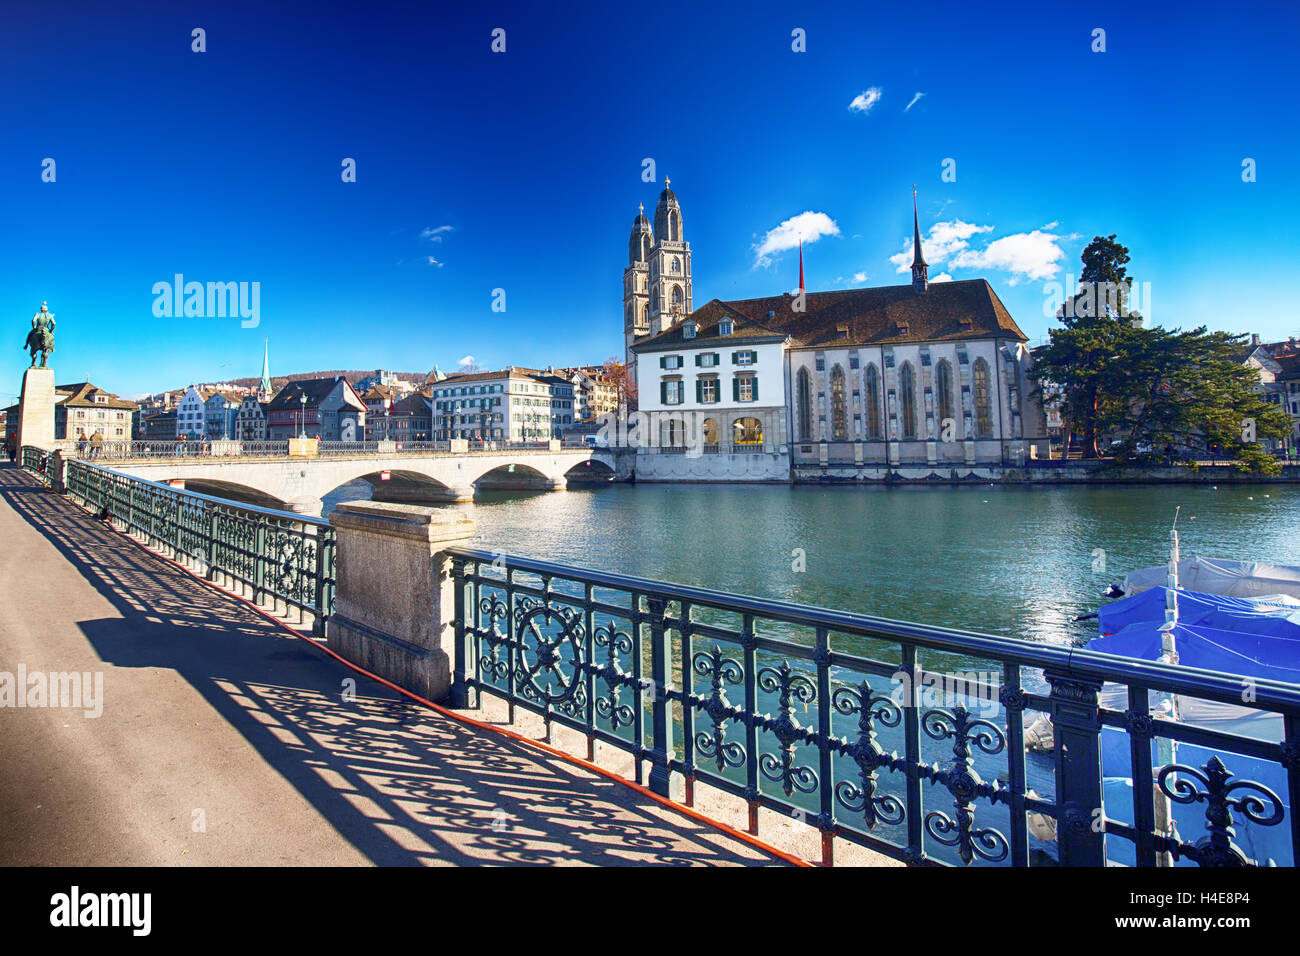 View of historic Zurich city center with famous Grossmunster Church and Limmat river Stock Photo